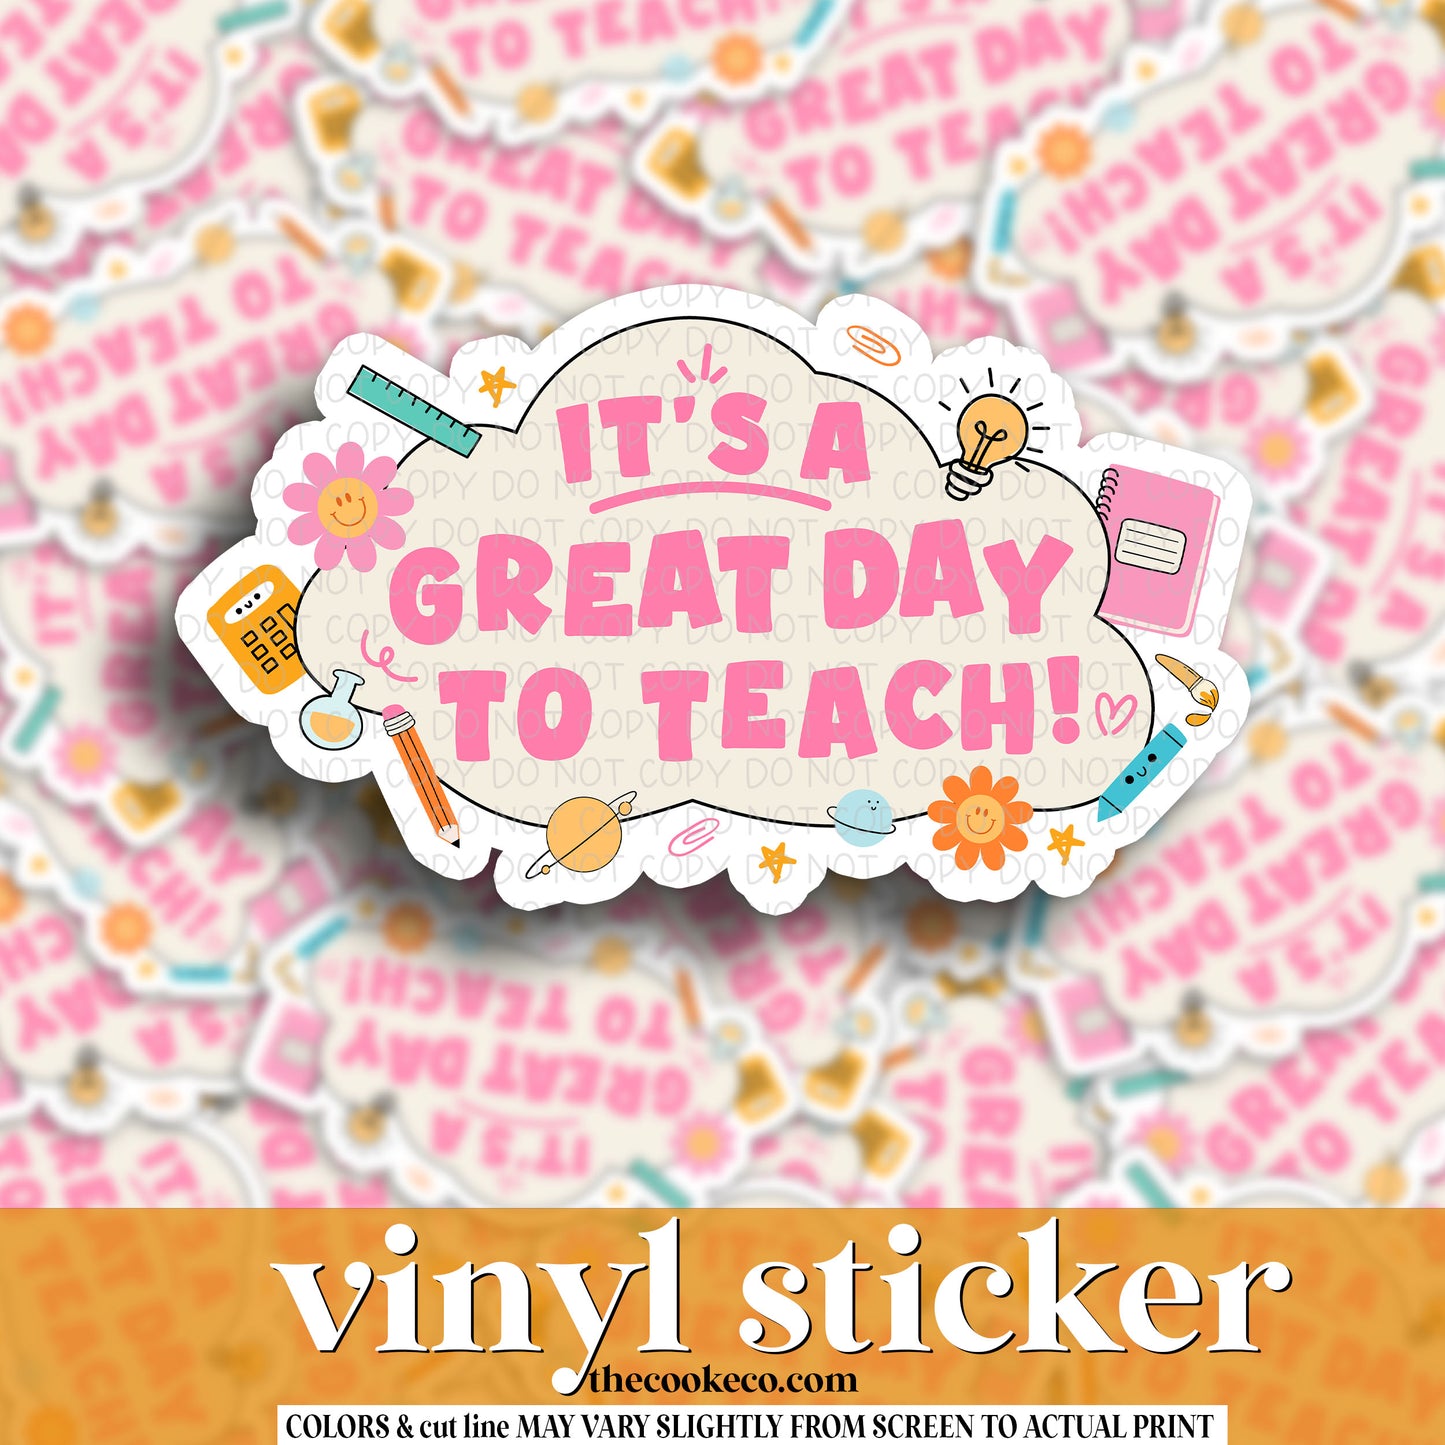 Vinyl Sticker | #V1101 - ITS A GREAT DAY TO TEACH!